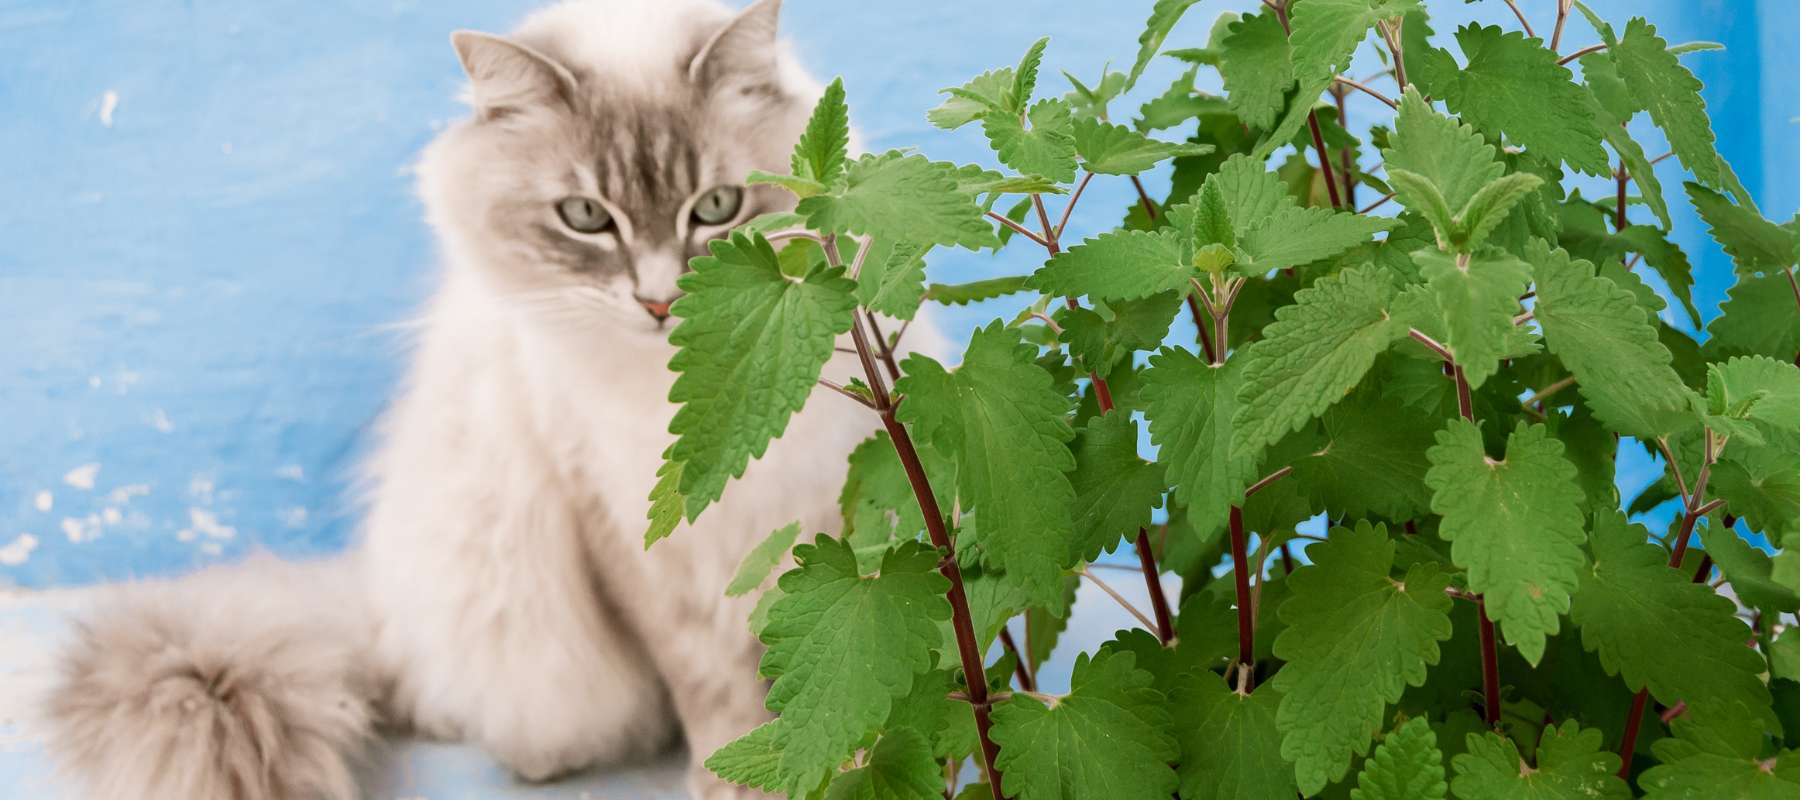 Growing Catnip and Other Pet Safe Herbs